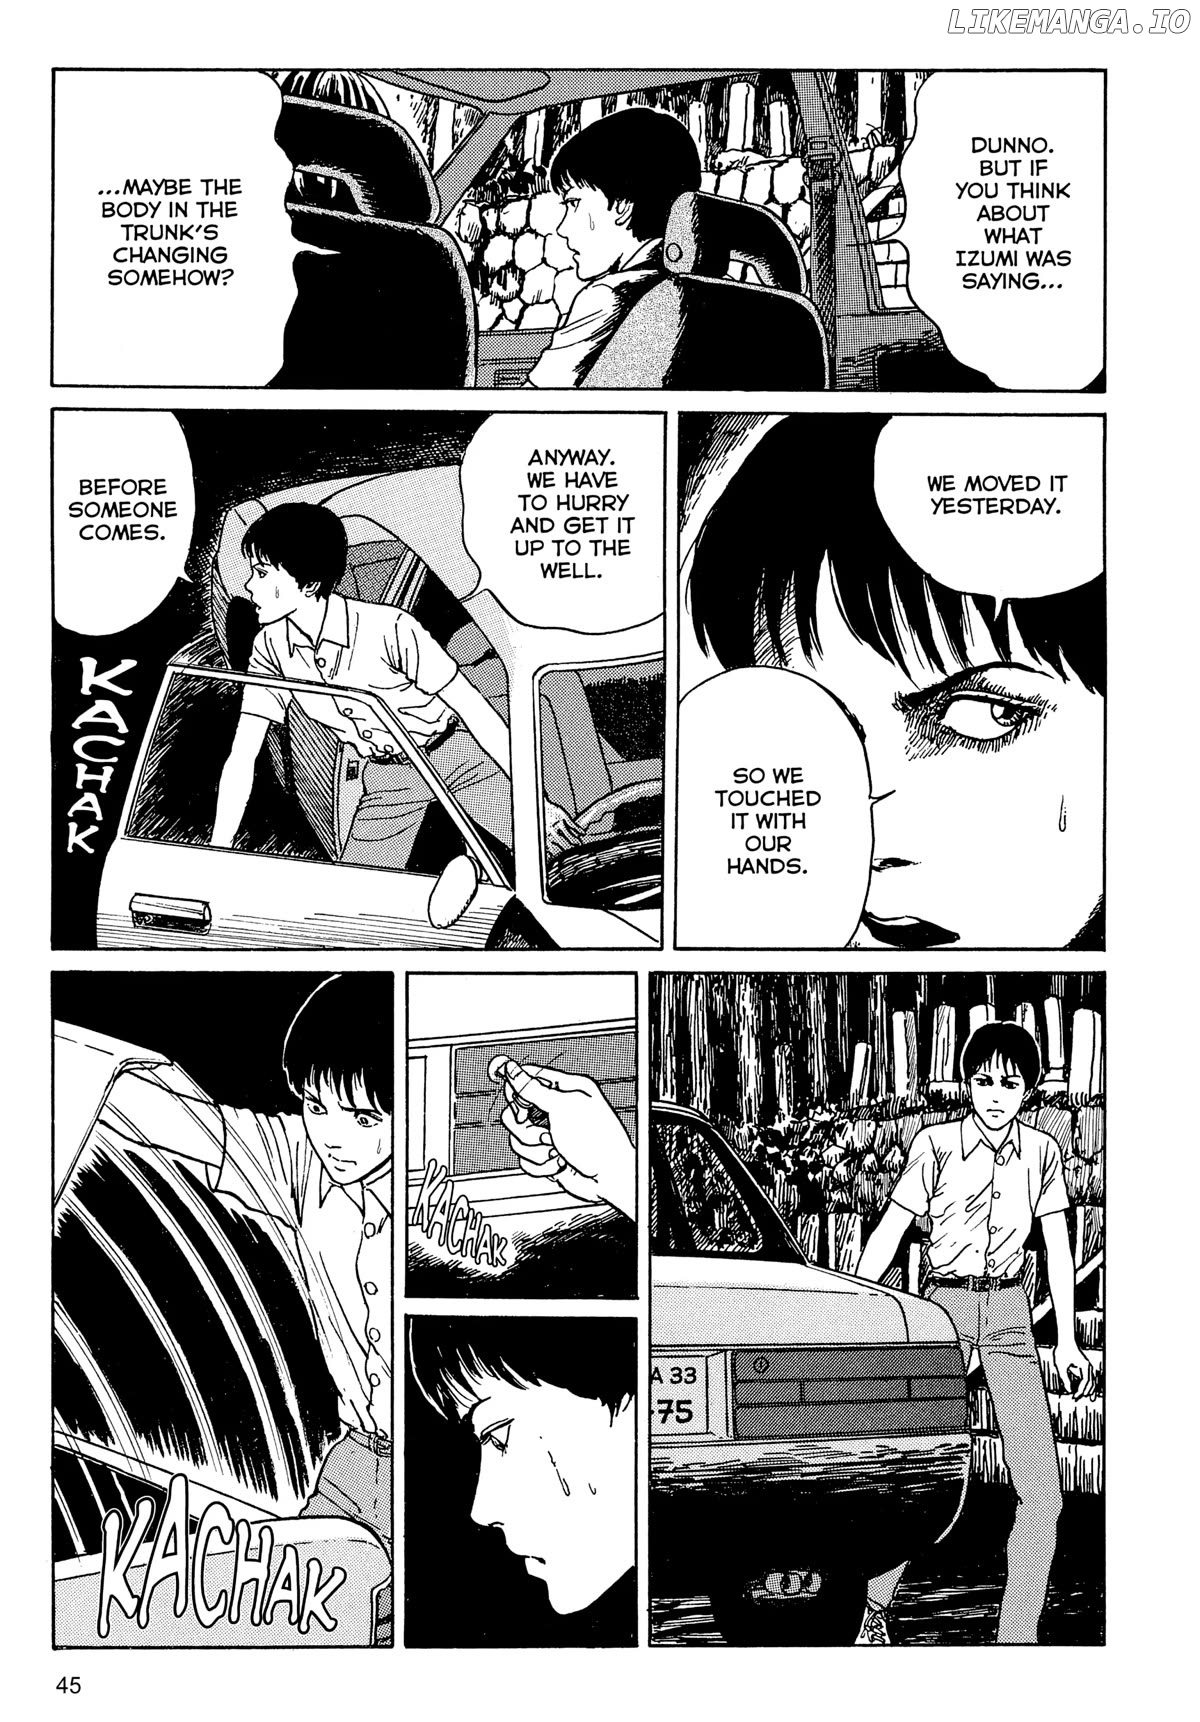 Tombs - Junji Ito Story Collection chapter 1 - page 46